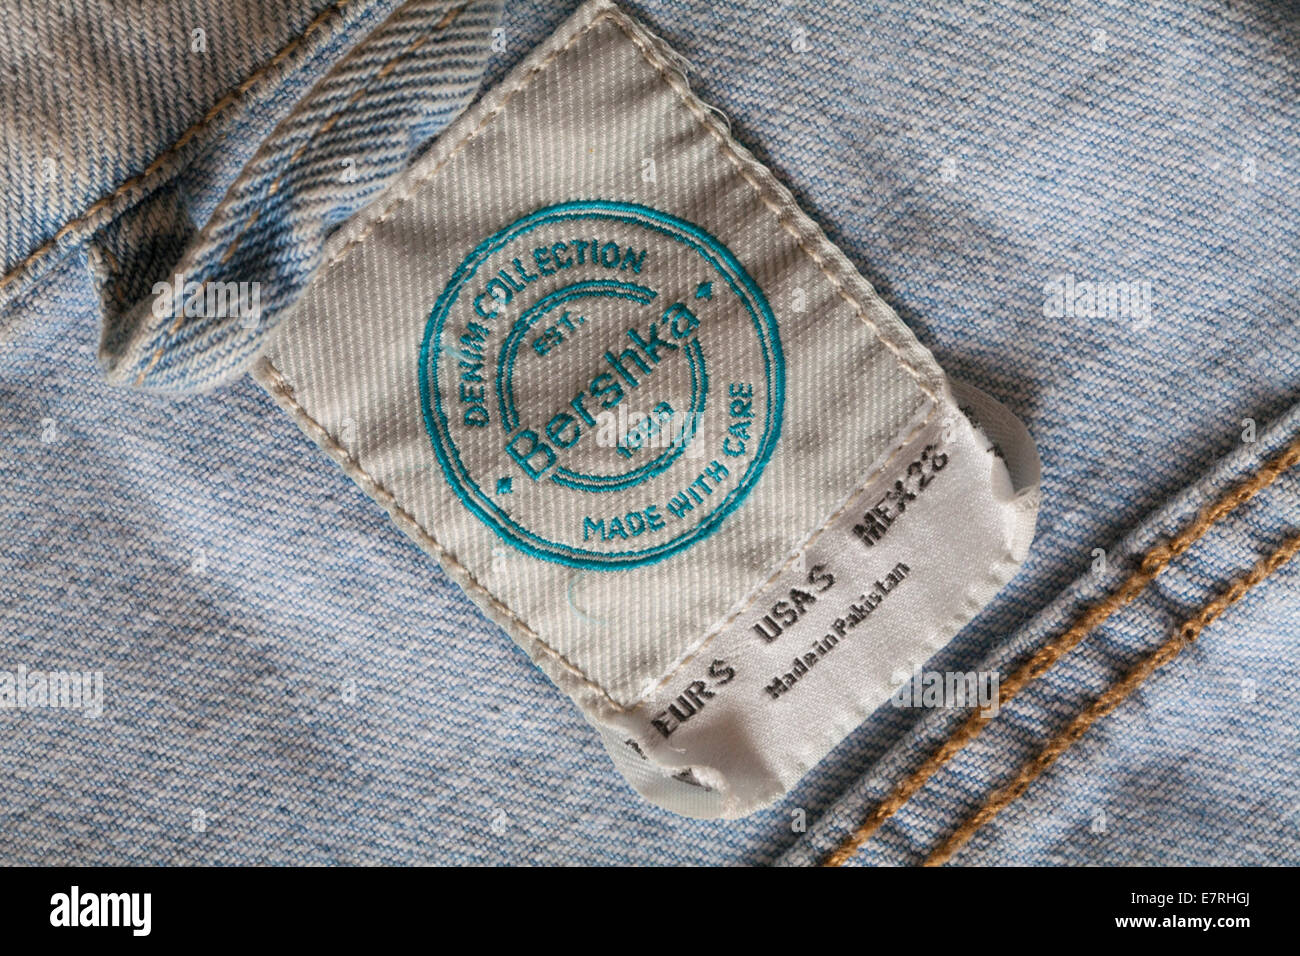 Denim collection Bershka Made with Care Made in Pakistan - sold in the UK United Kingdom, Great Britain Stock Photo